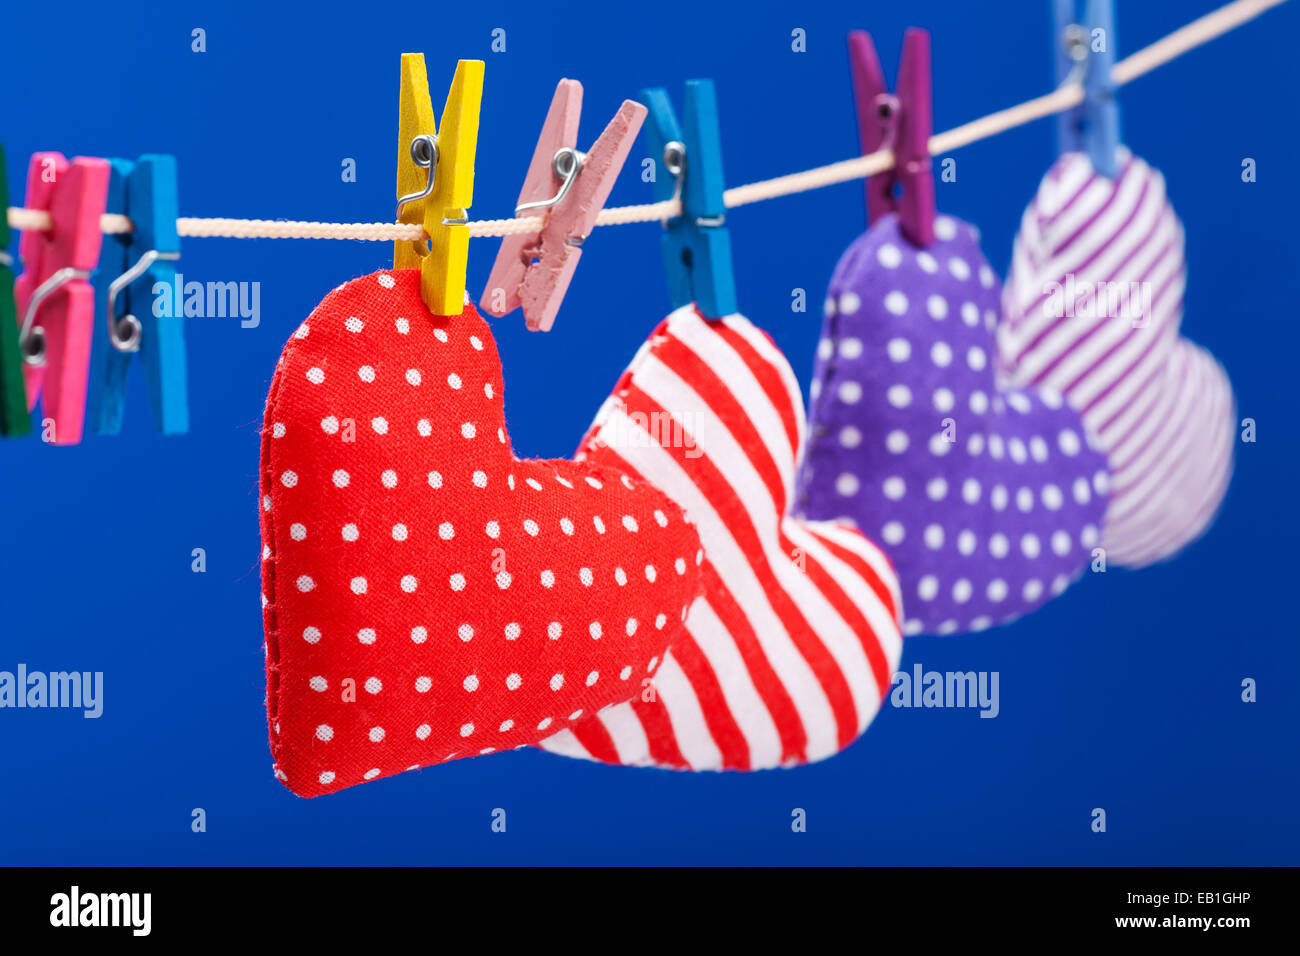 hearts hanging on a clothesline with clothespins, focus on red. Blue background Stock Photo